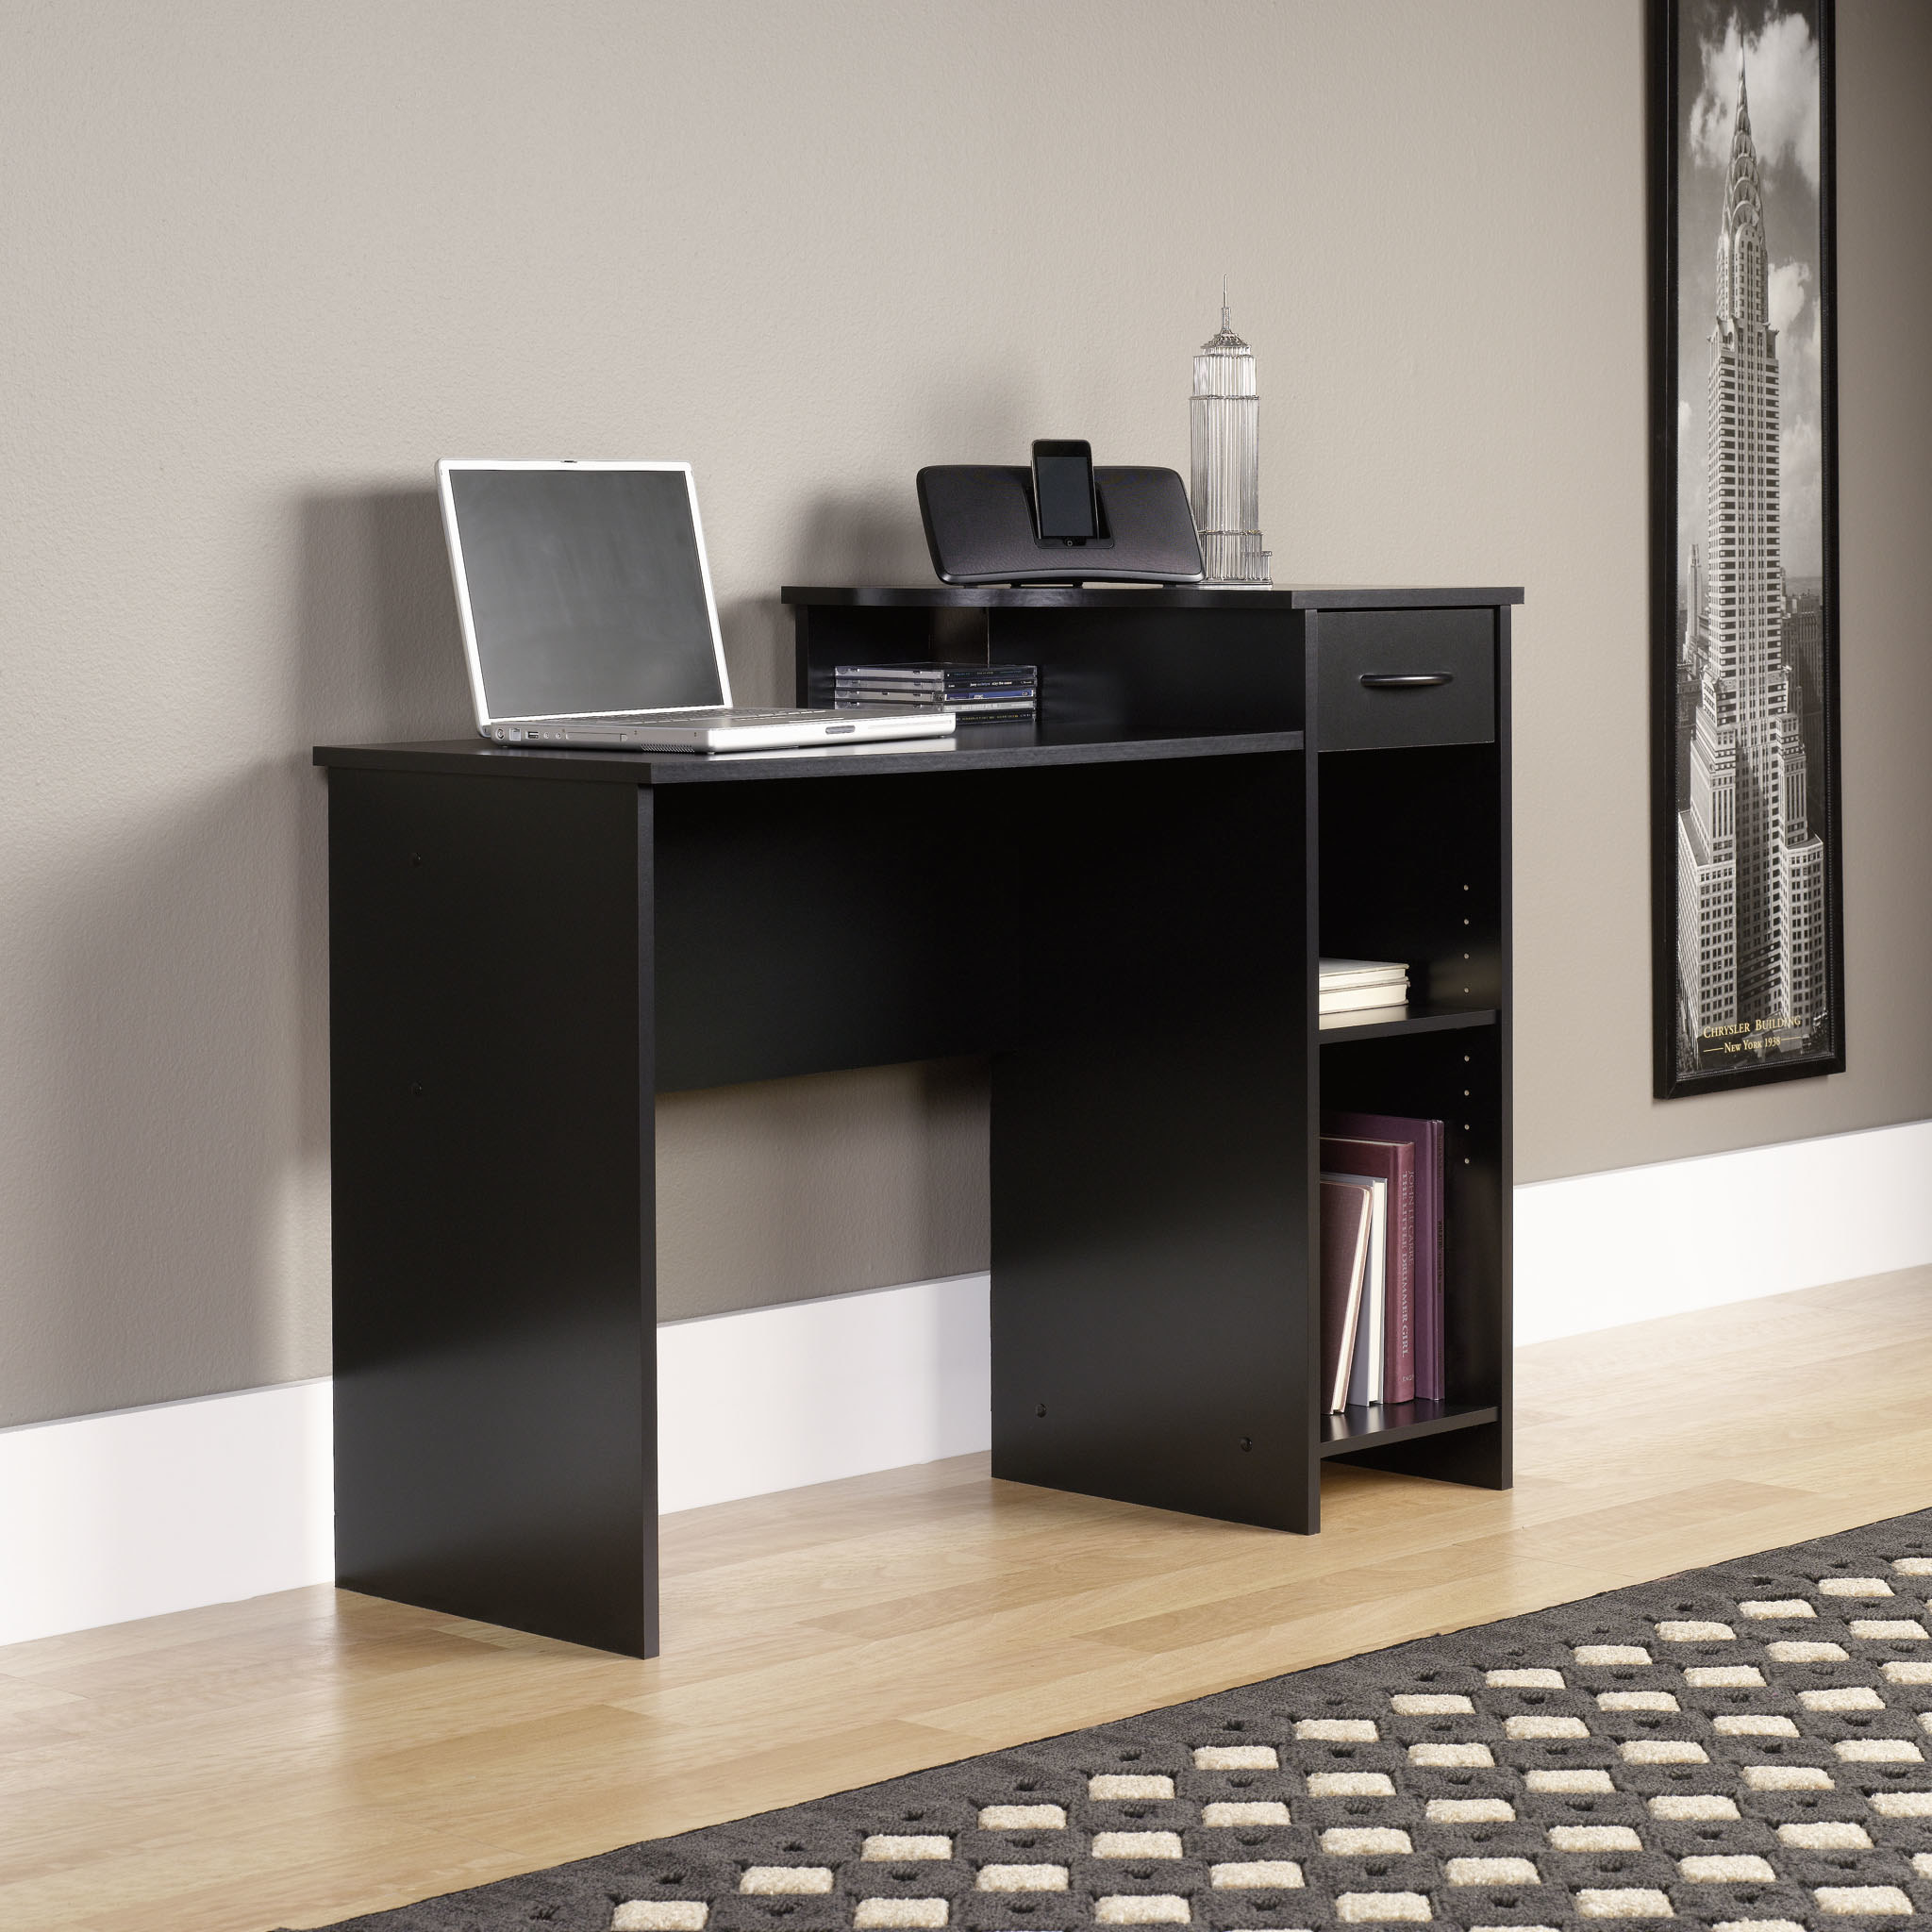 The desk is black and has a couple of storage shelves and a small drawer 